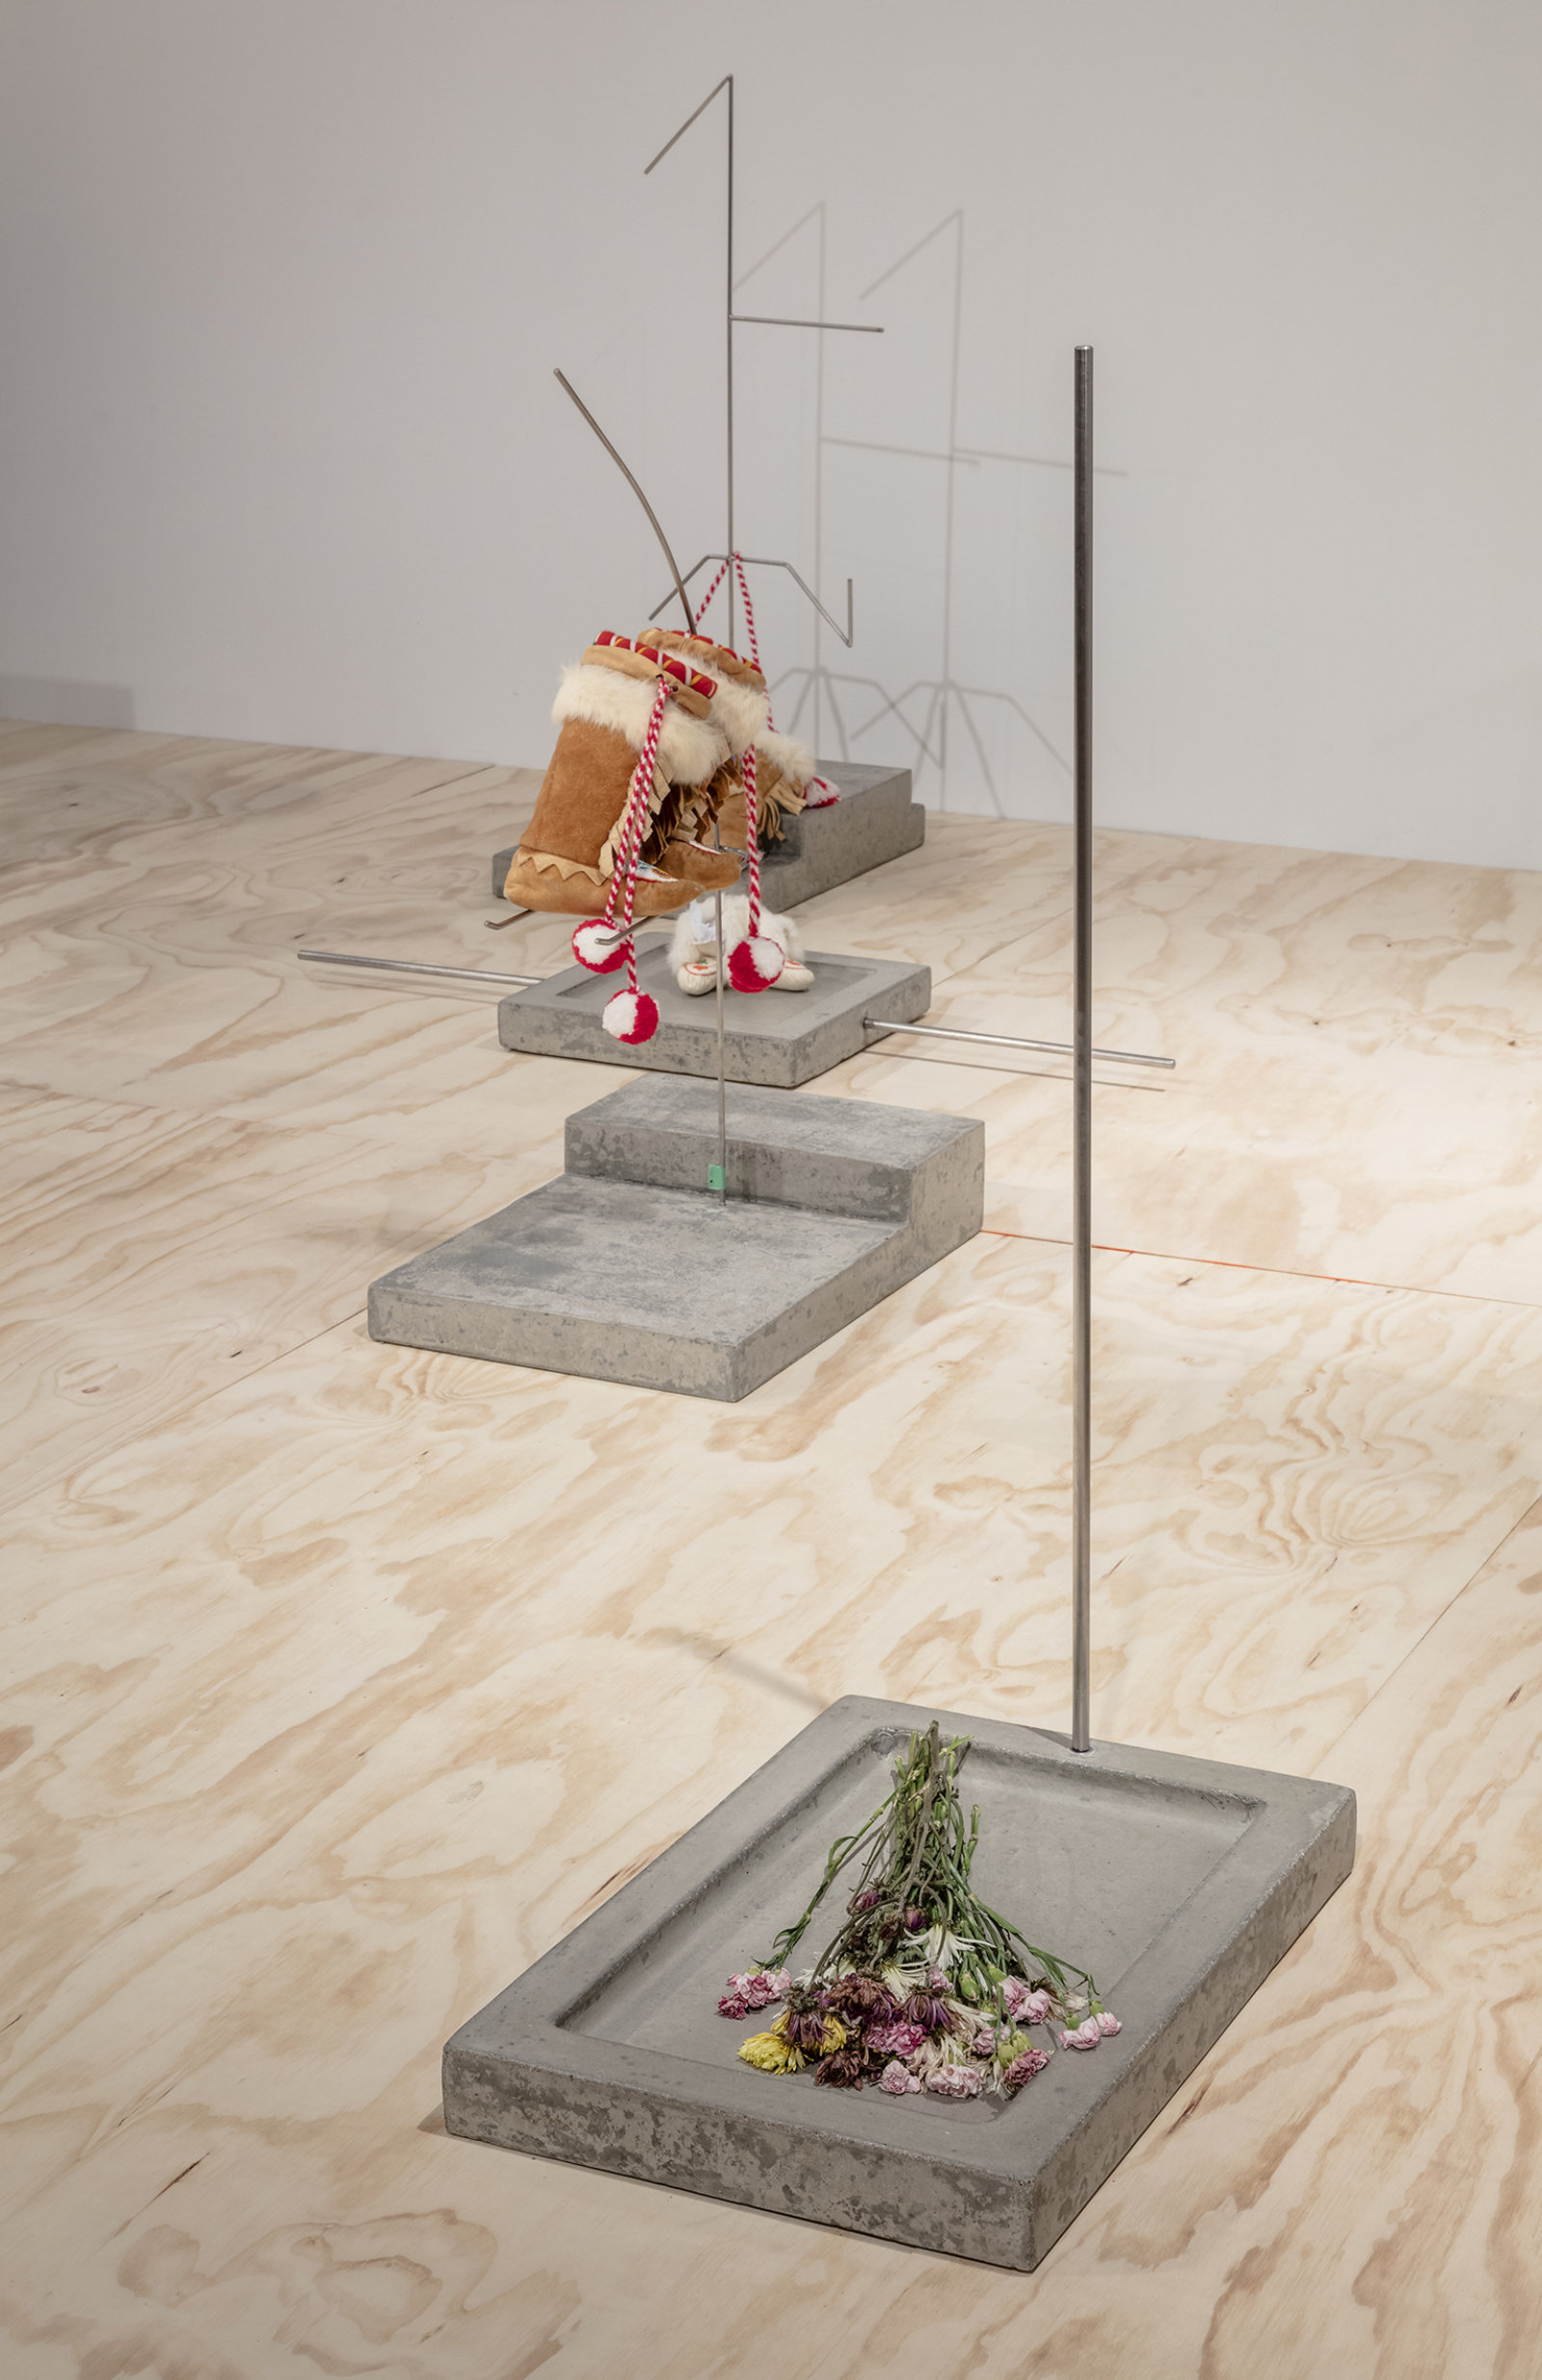 Duane Linklater, Speculative apparatus 7 for the work of nohkompan, 2016, concrete, stainless steel, flowers, 24 x 16 x 43 in. (61 x 41 x 109 cm)